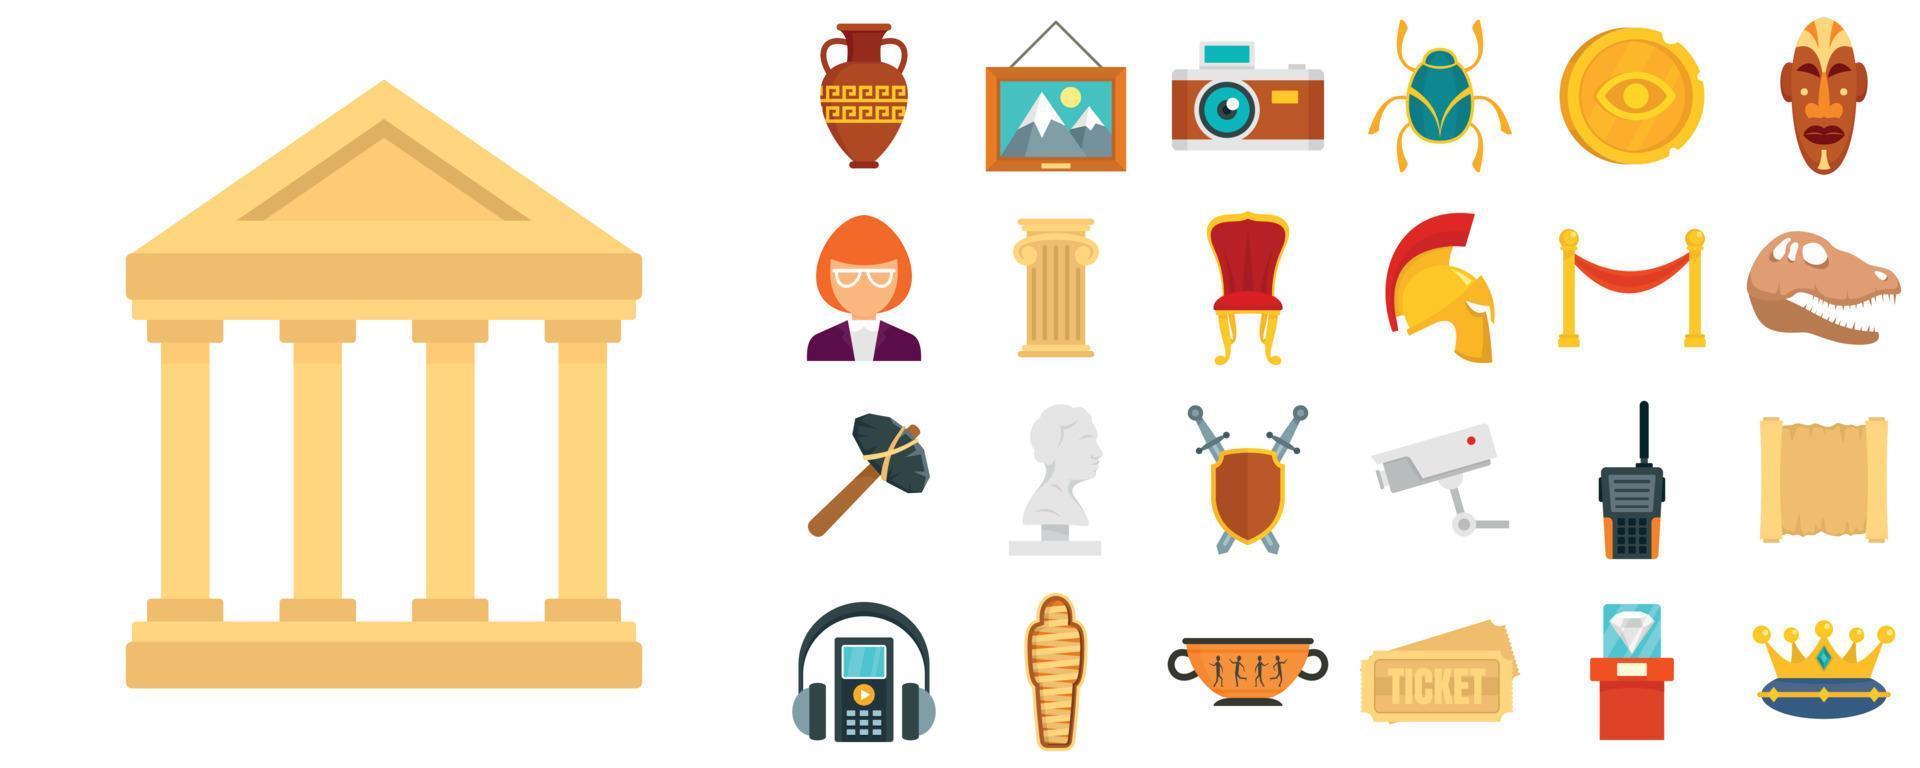 Museum icon set, flat style vector